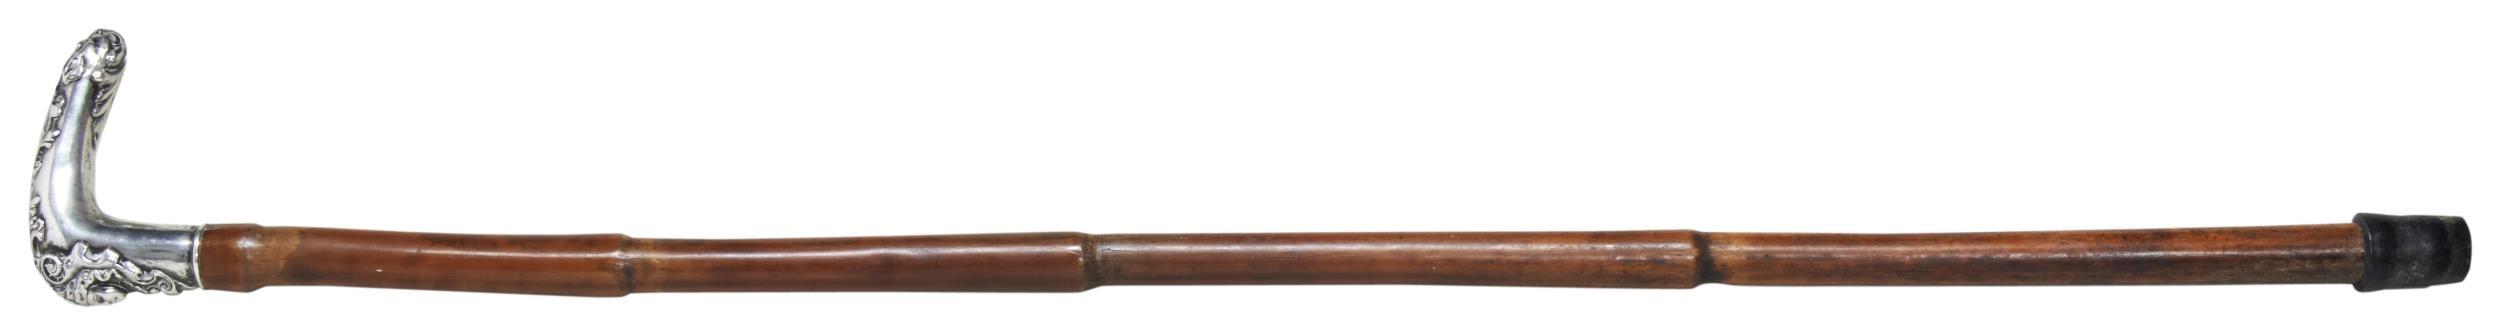 A 19TH CENTURY CANE with an ornate white metal handle decorated with a head of a grotesque and a - Image 2 of 2